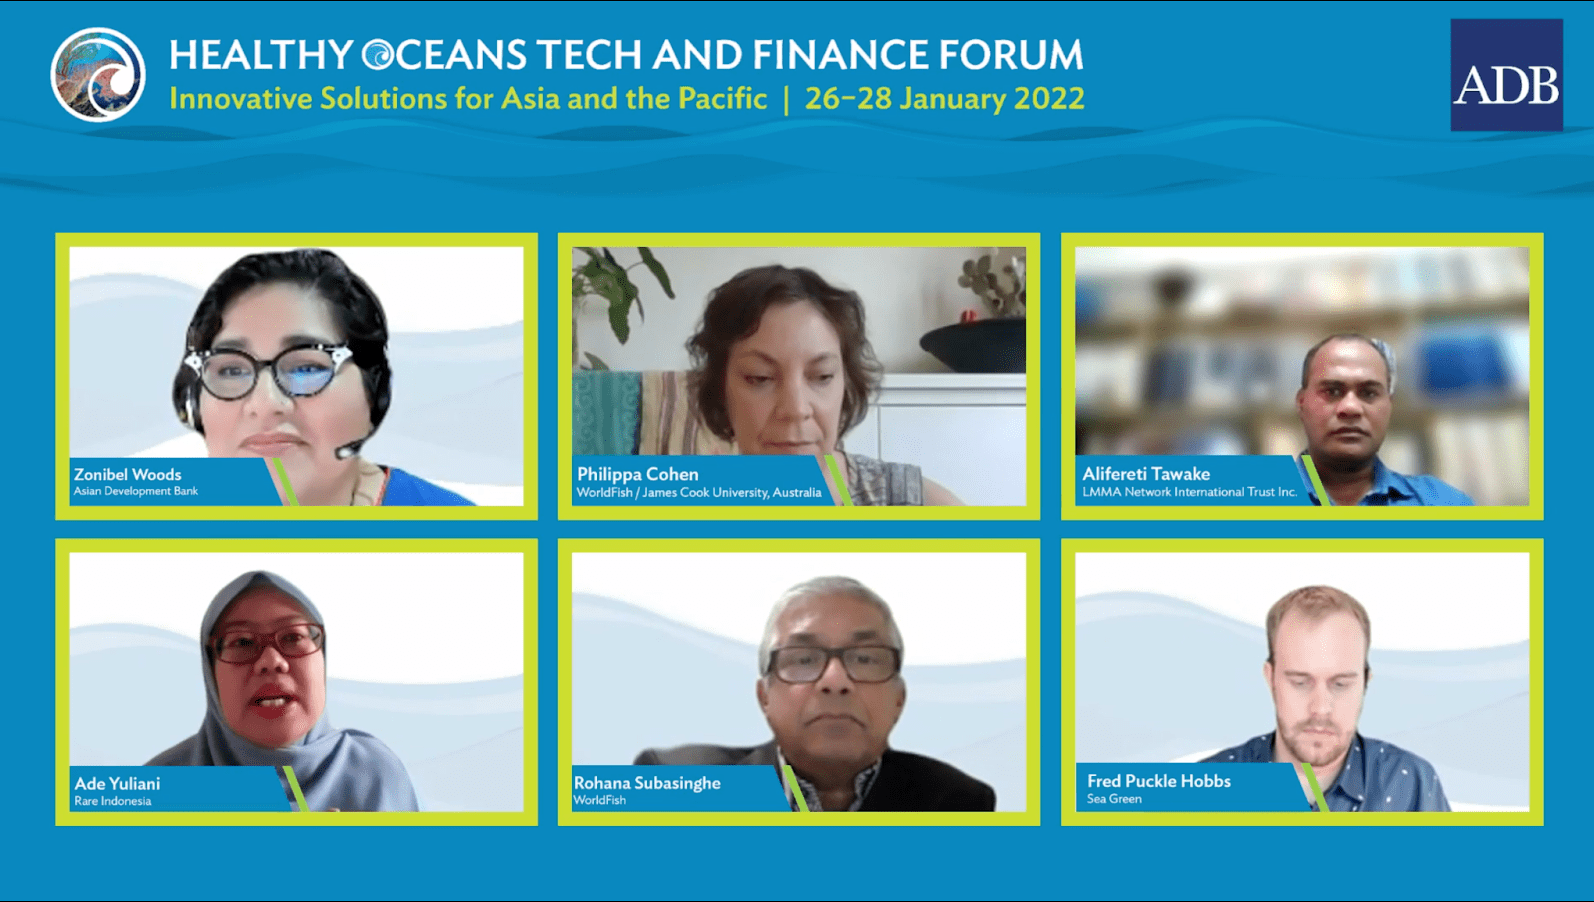 Healthy oceans tech and finance forum